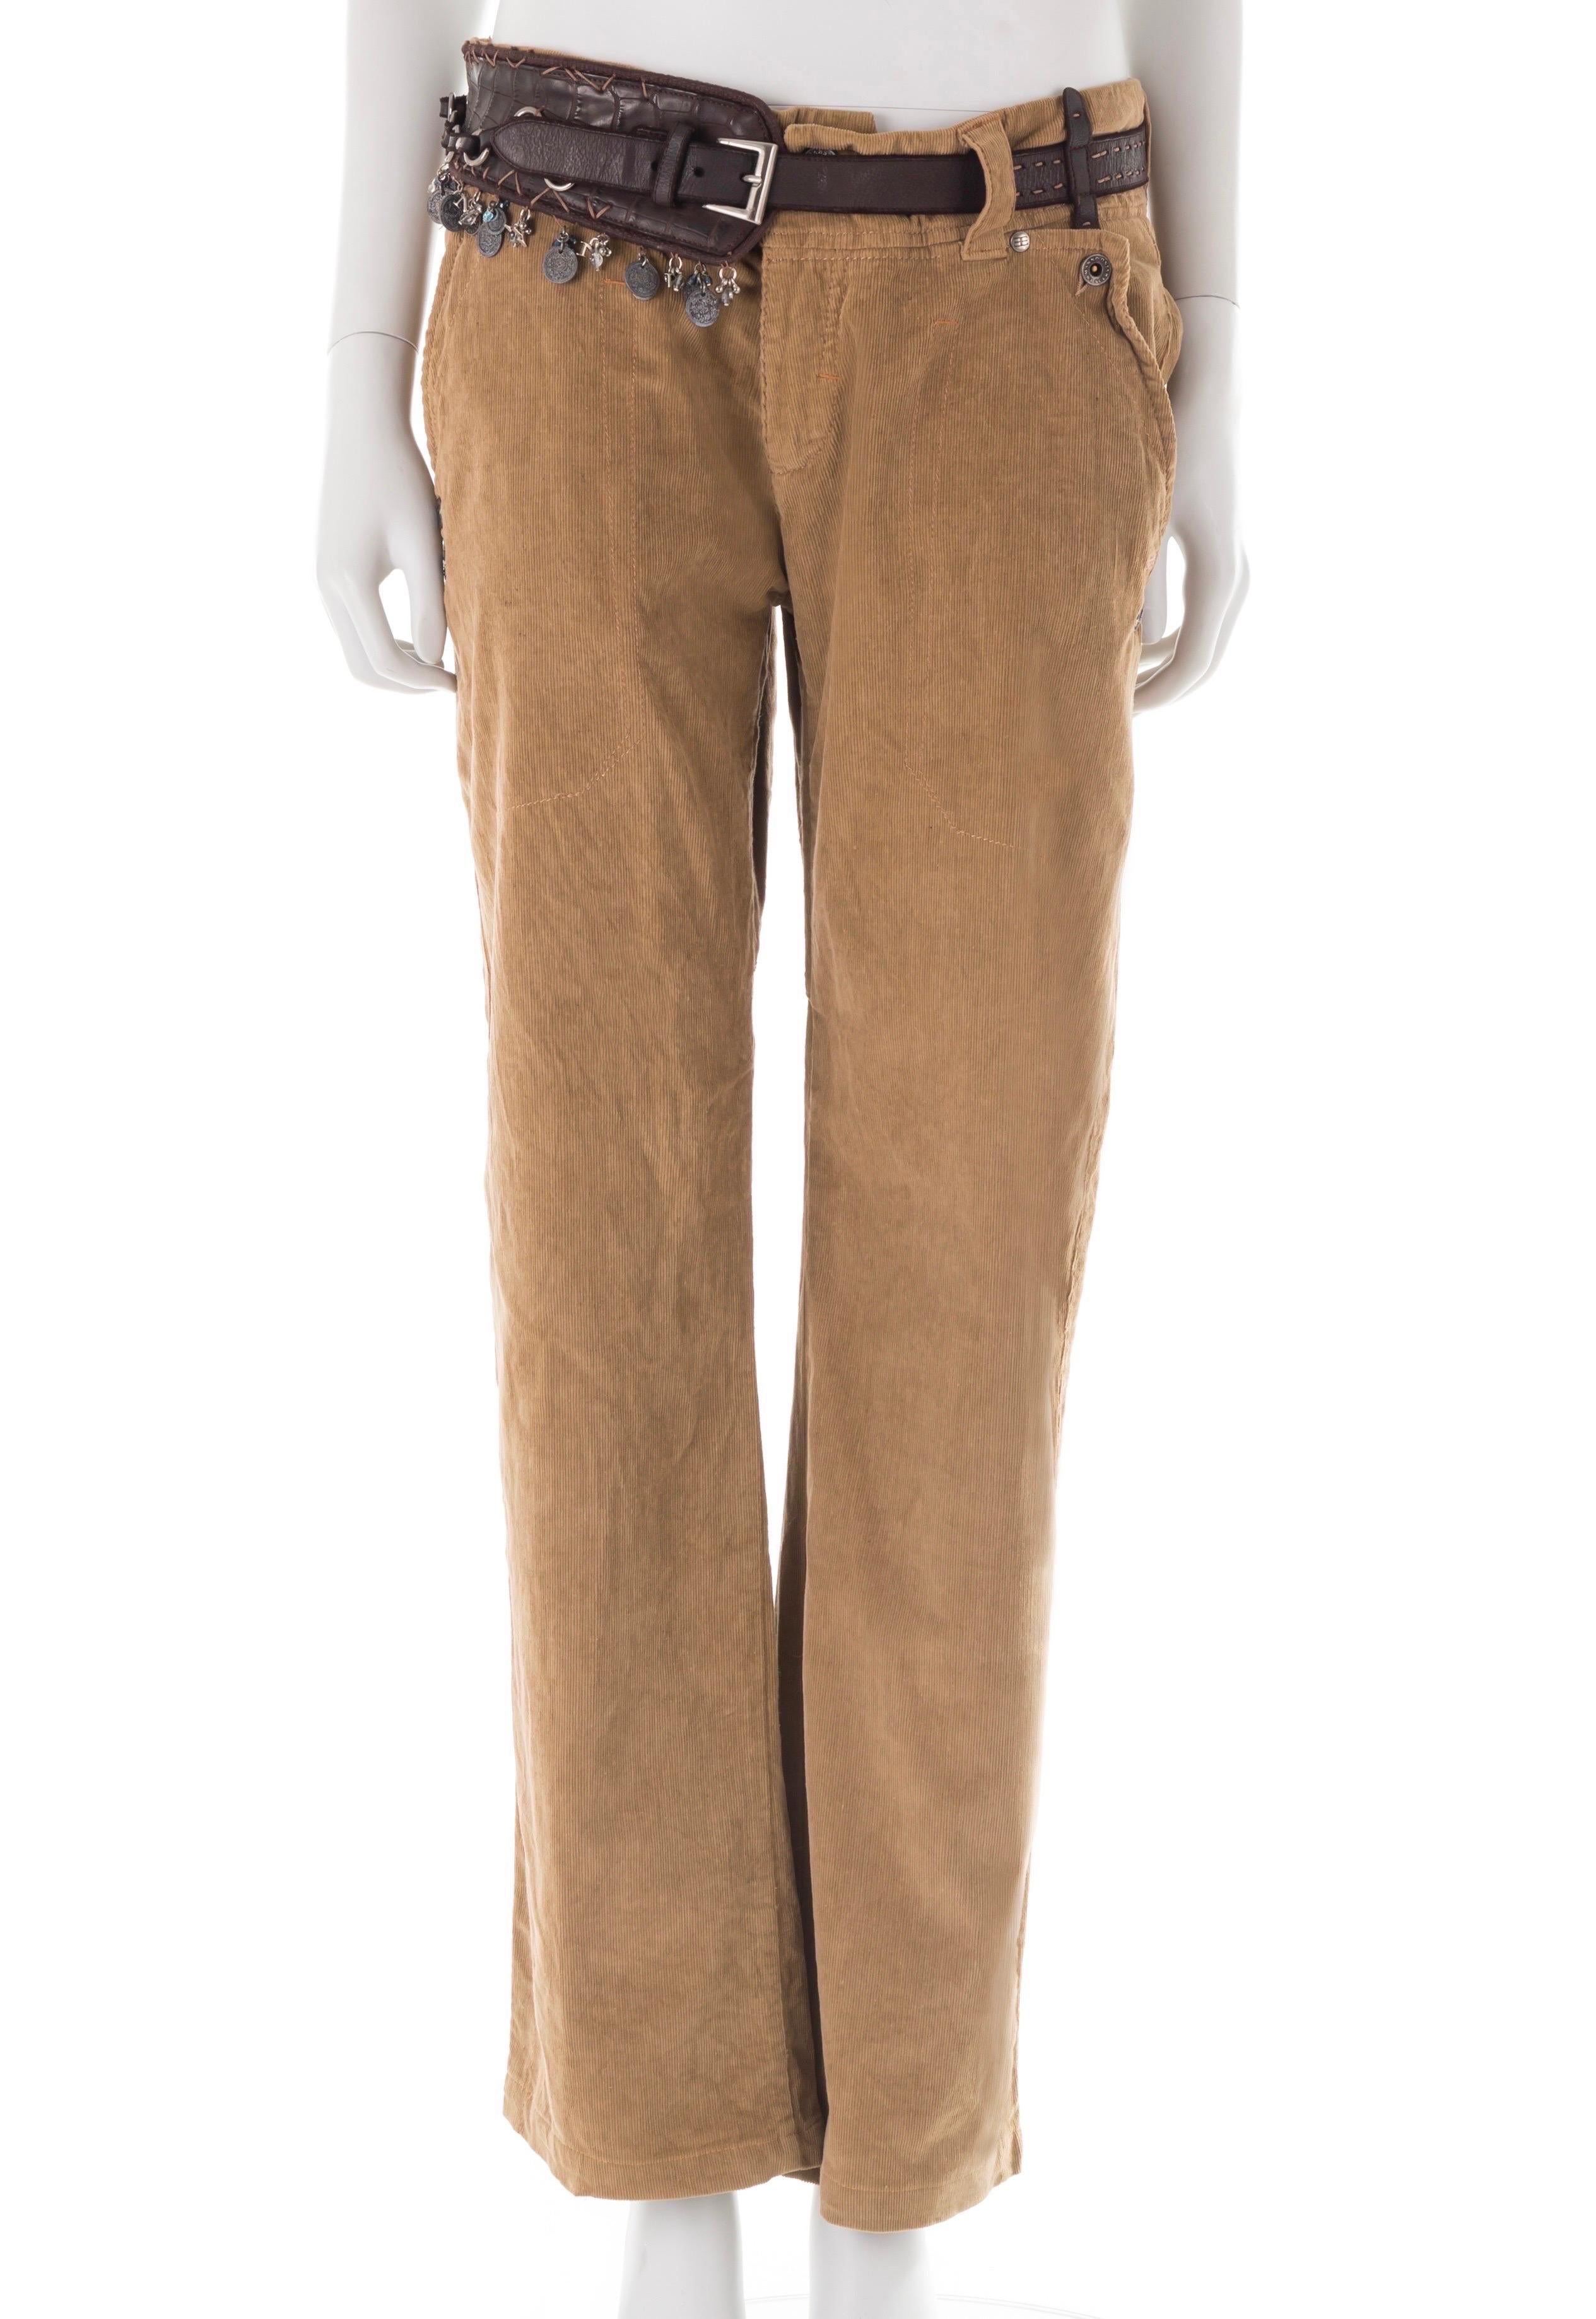 Ermanno Scervino F/W 2005 camel corduroy pants with maxi leather belt For Sale